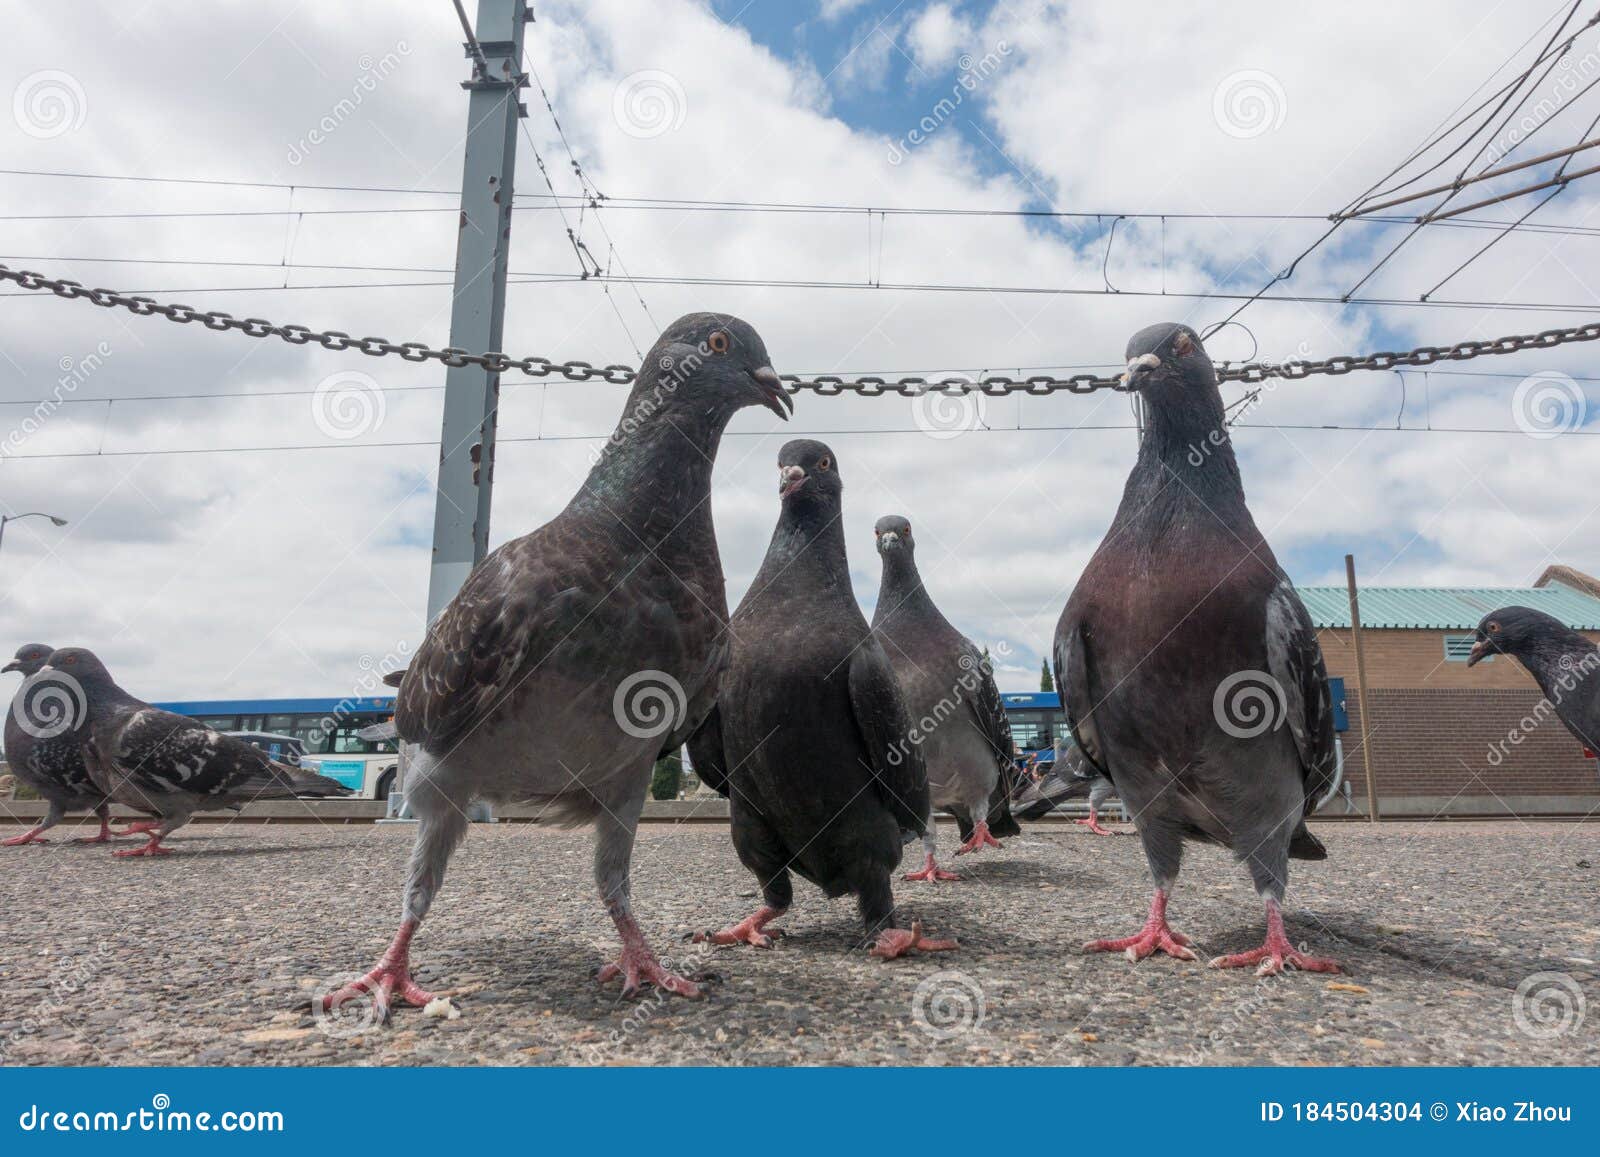 Funny pigeon stock photo. Image of head, pure, background - 184504304